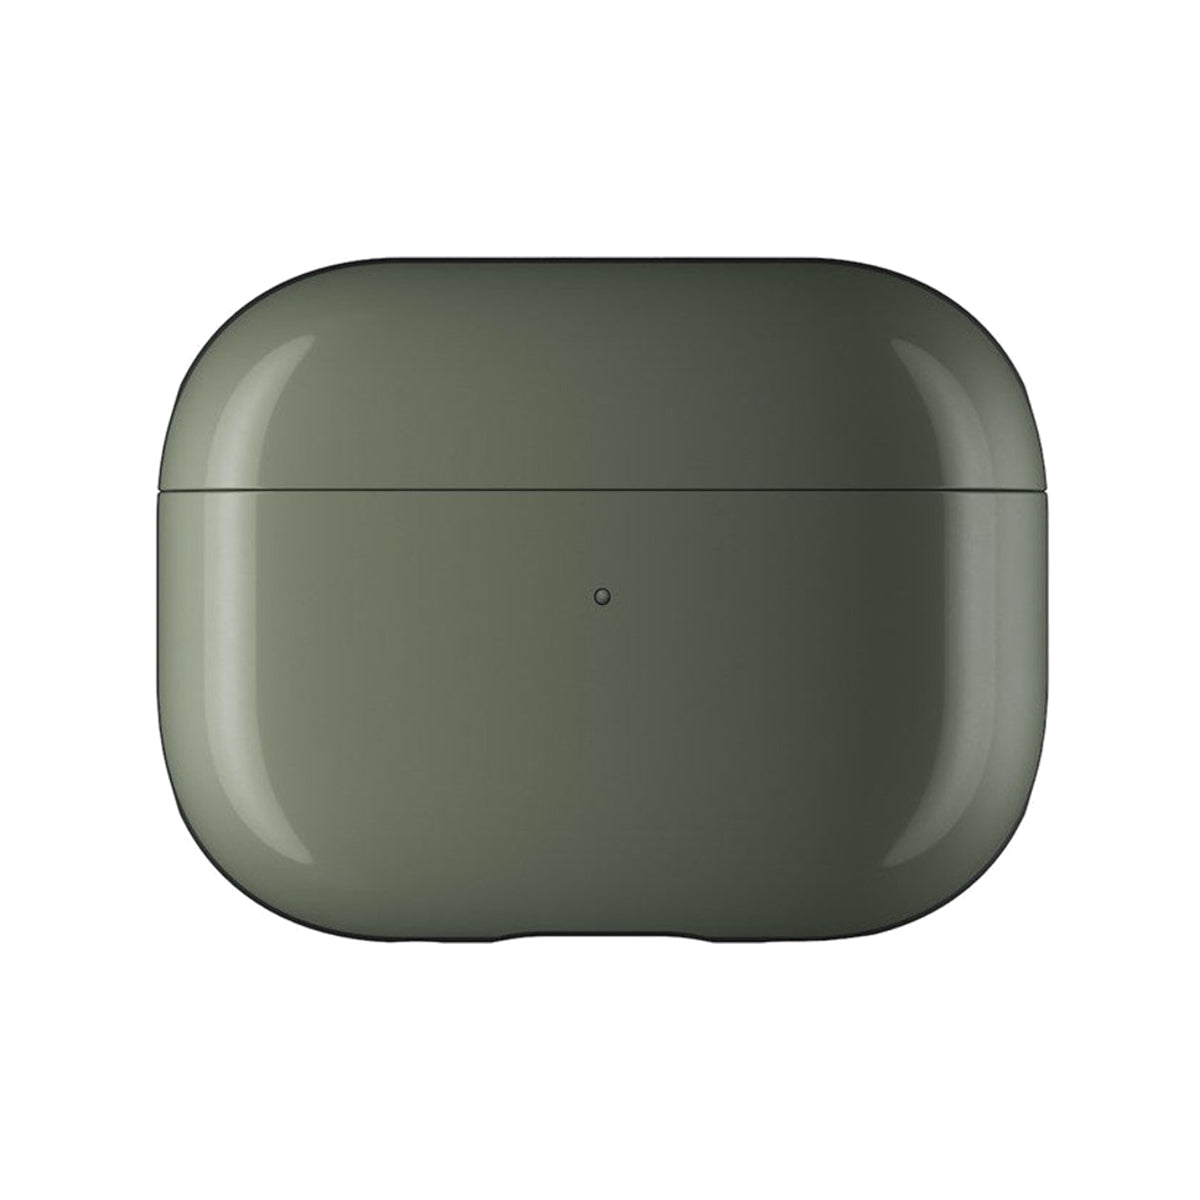 NOMAD Sport Case For Airpods Pro (2nd gen) - Ash Green